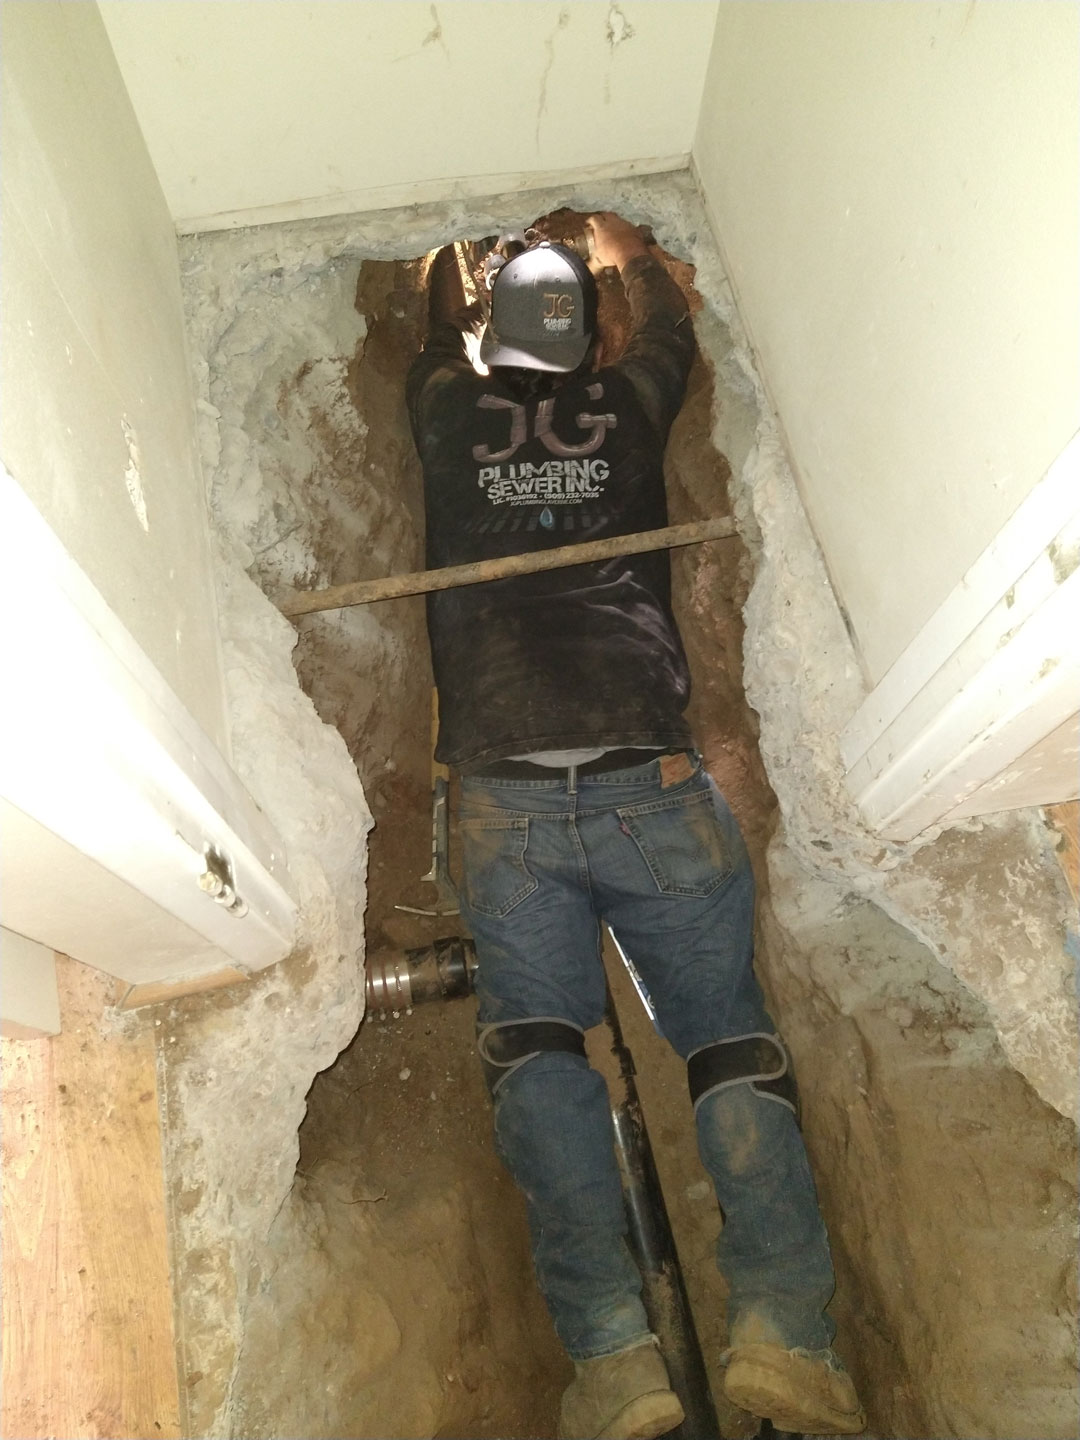 Working in Trench - J G Plumbing and Sewer Inc.